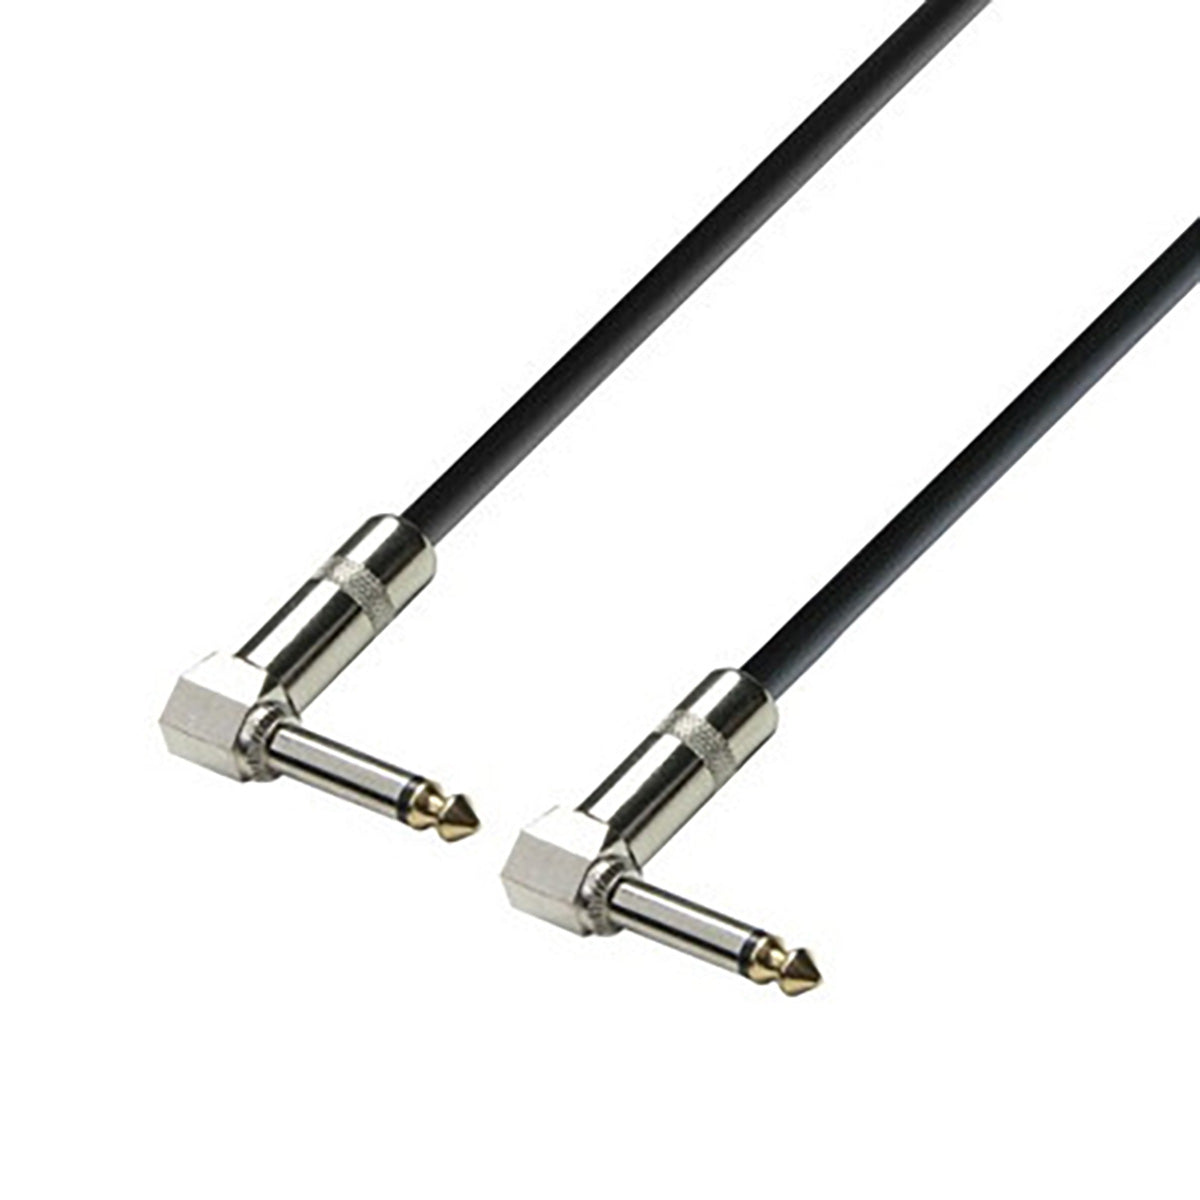 Adam Hall Cables K3 IRR 0030 - Instr Cable 6.3mm angled Jack mono to 6.3mm angled Jack mono 0.3m